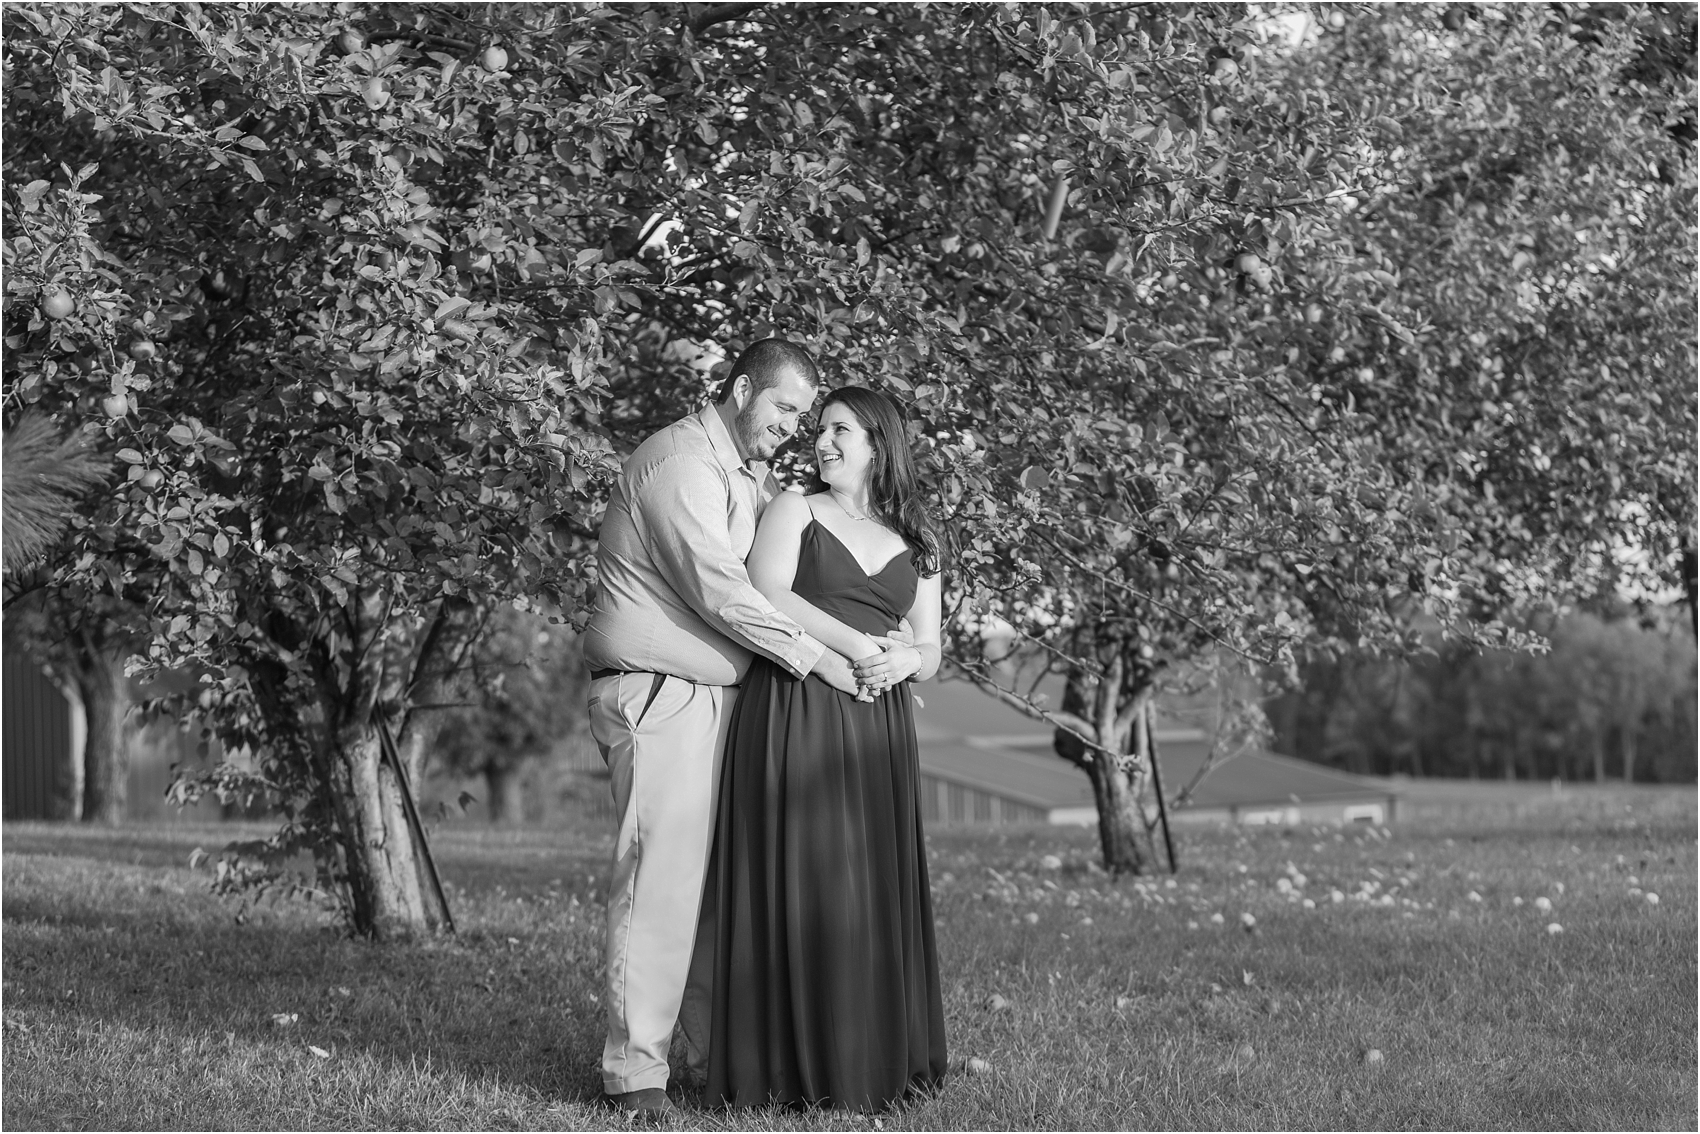 candid-romantic-summer-engagement-photos-at-hidden-lake-gardens-and-black-fire-winery-in-tipton-mi-by-courtney-carolyn-photography_0008.jpg